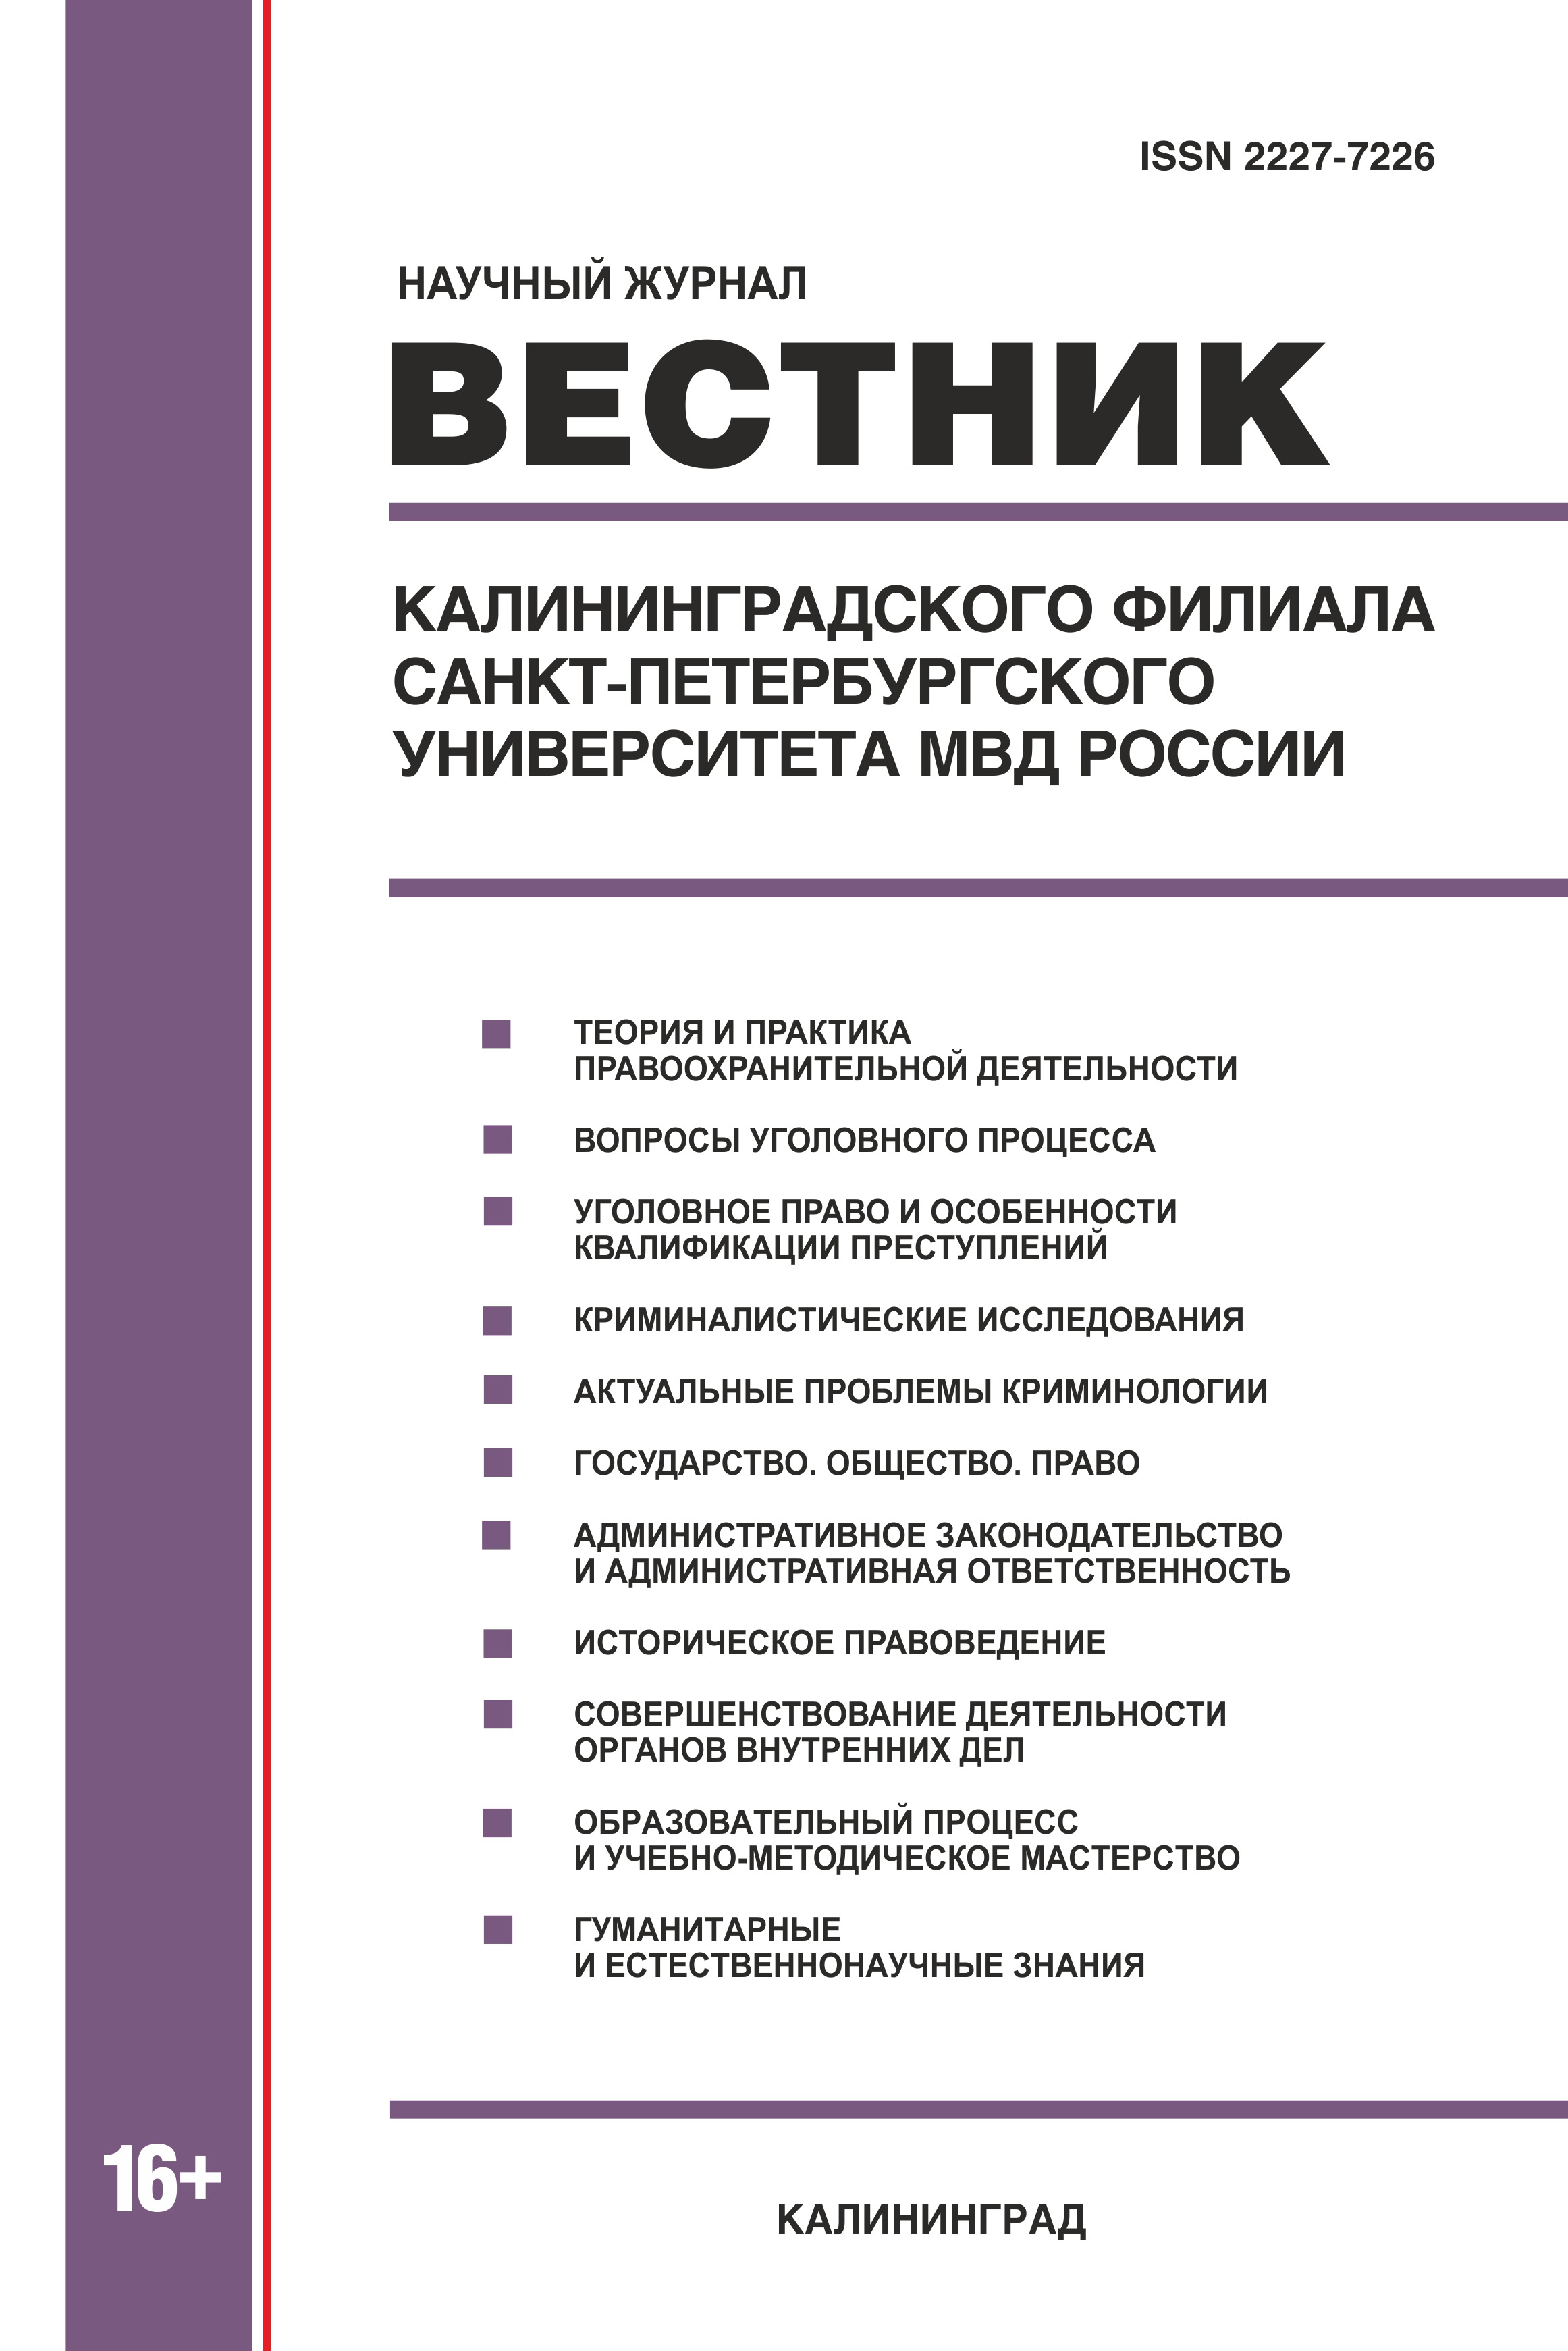                         Bulletin of the Kaliningrad branch of the Saint-Petersburg University of the Ministry of Internal Affairs of Russia
            